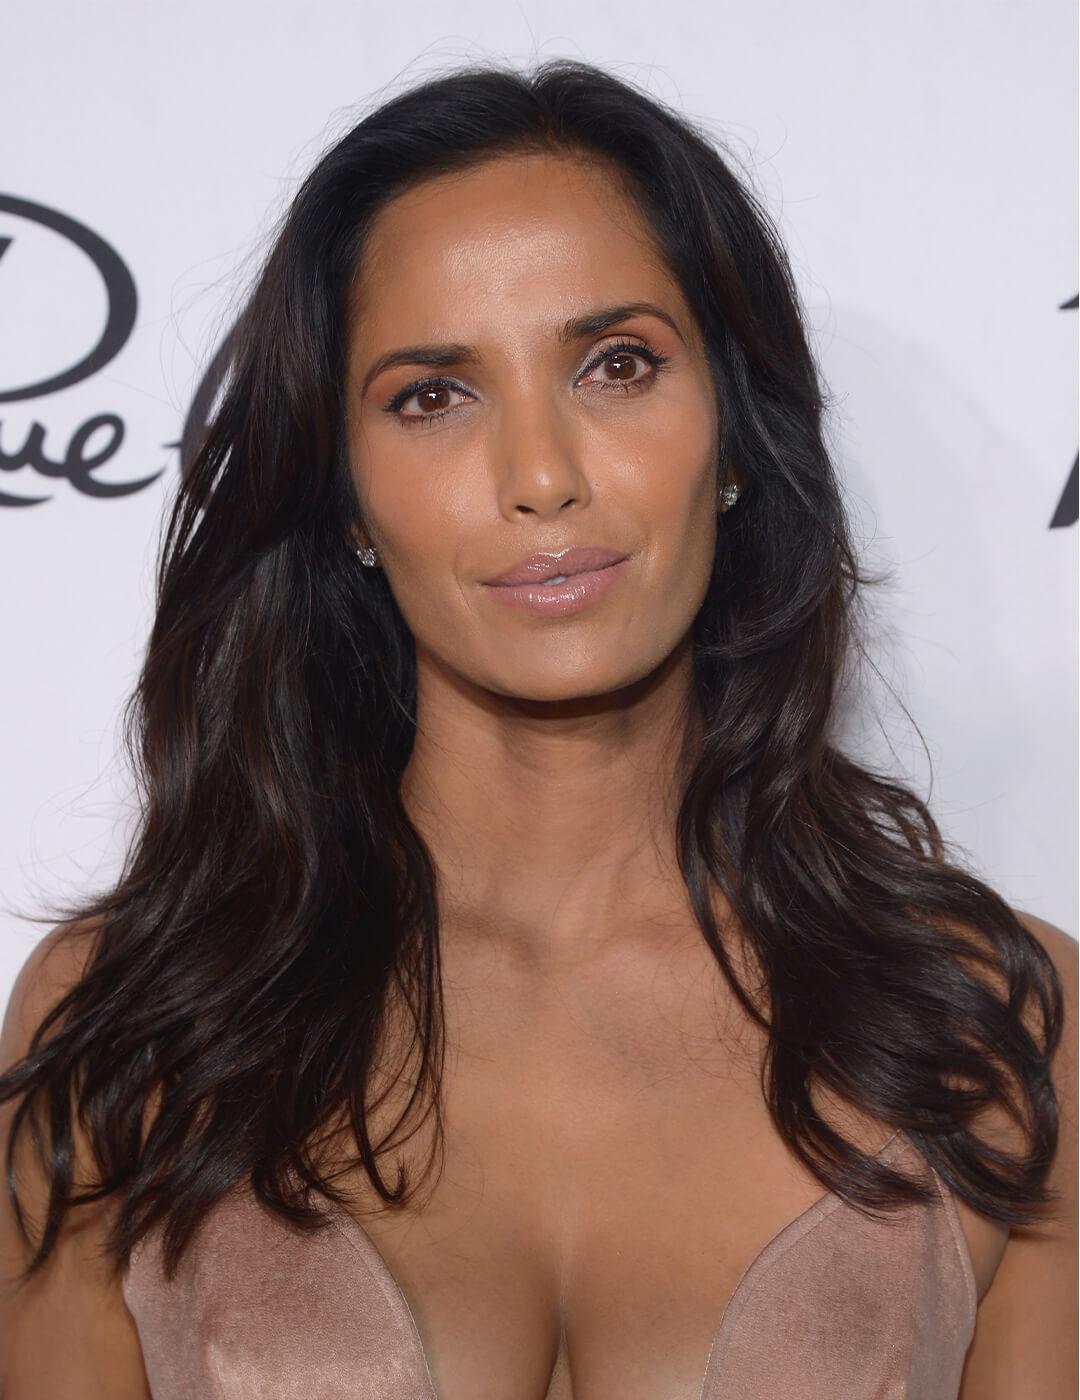 Padma Lakshmi posing in a shimmery nude dress with a beach wave hairstyle